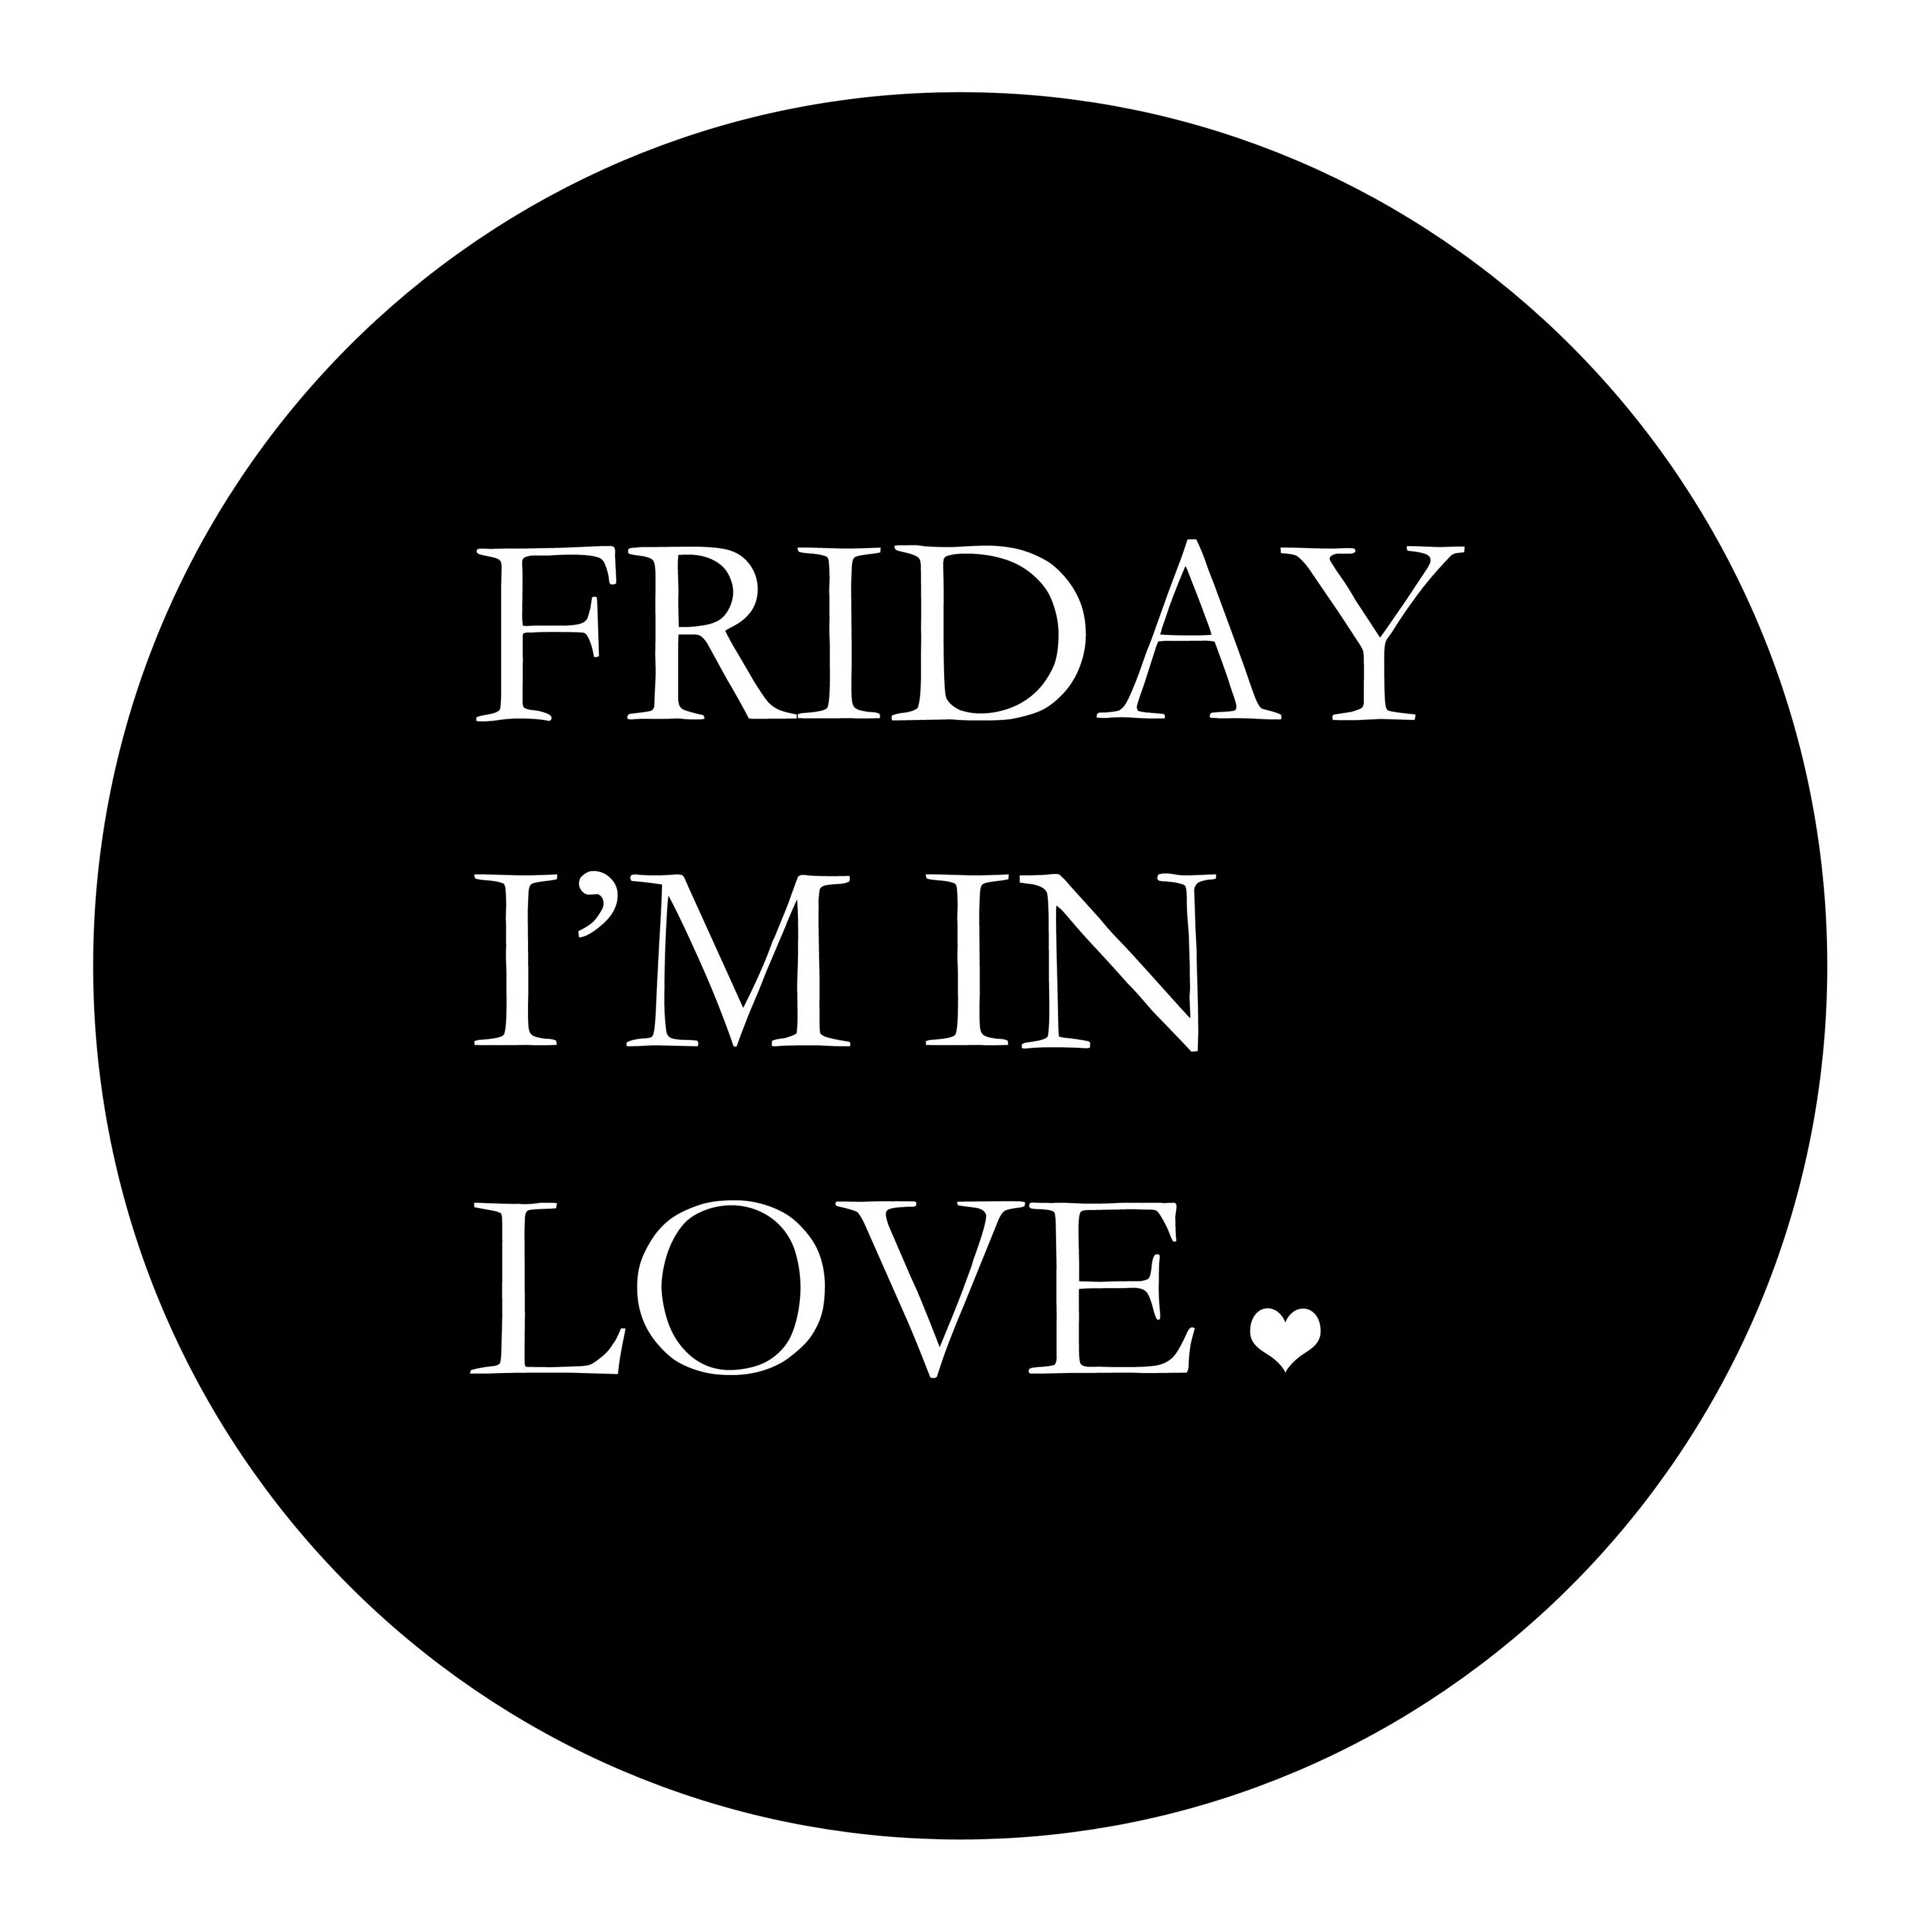 Friday i in love the cure. Friday i/m in Love. Friday im in Love. Friday im in Love the Cure. Friday i am in Love.